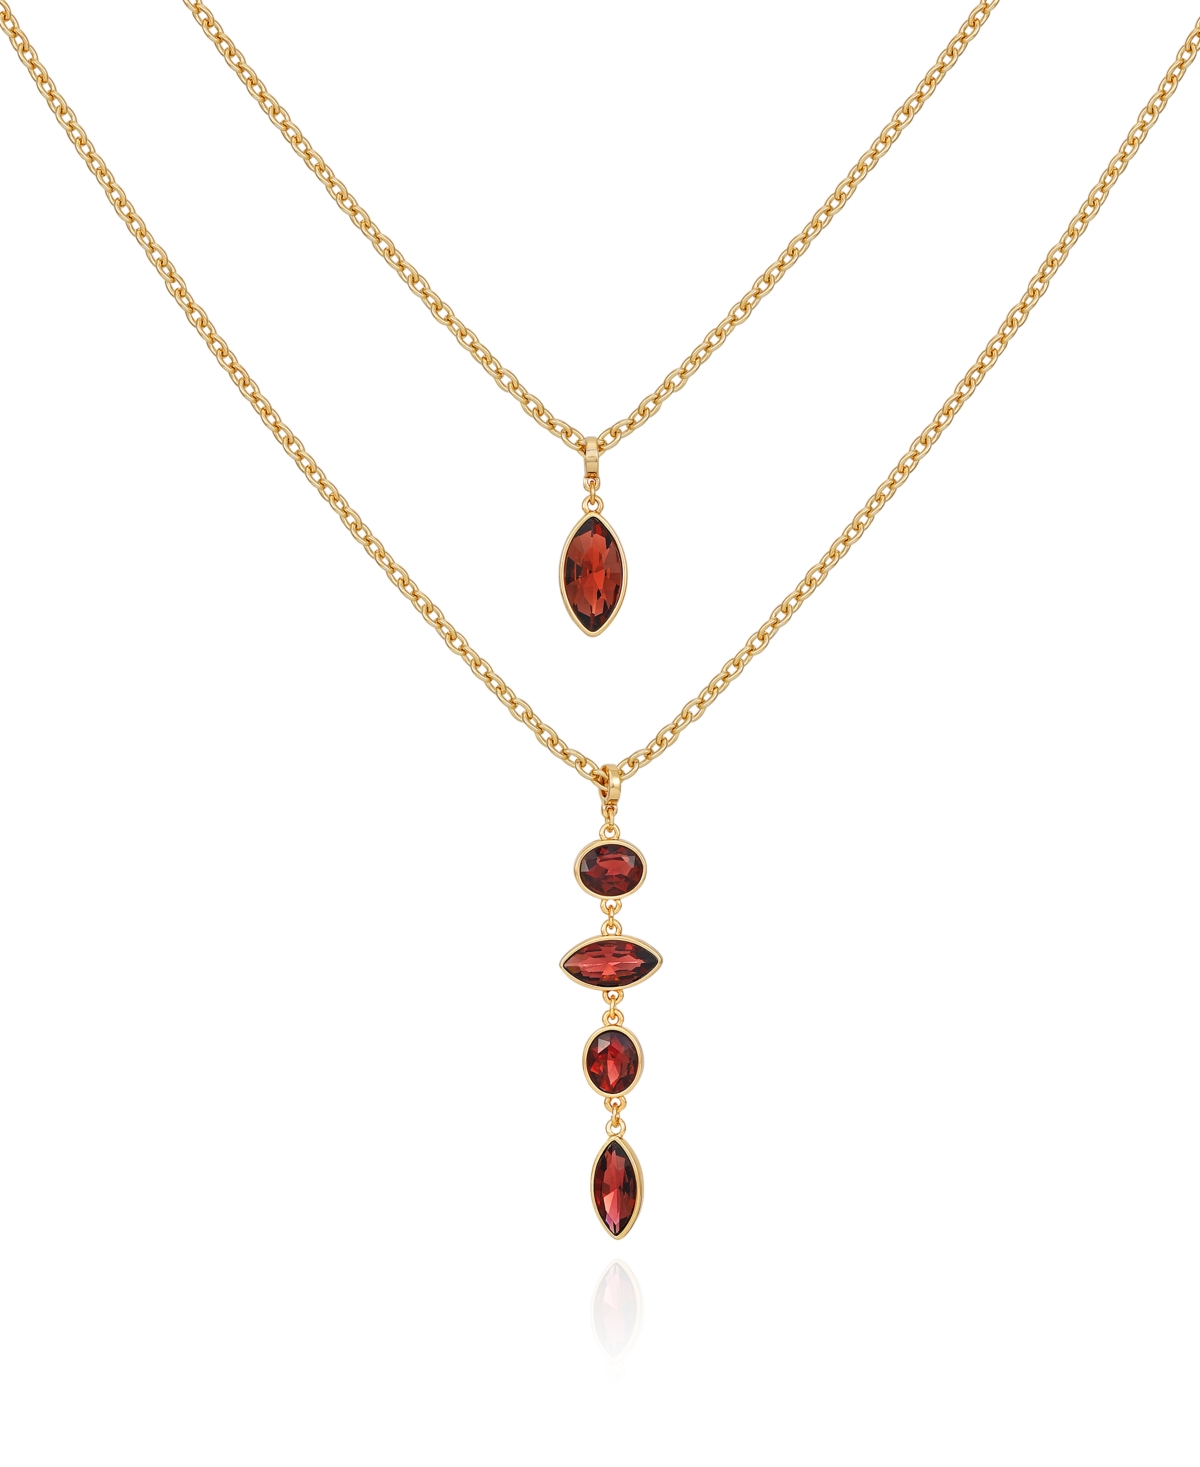 T Tahari Gold-tone Red Glass Stone Layered Necklace Set, 18", 30" + 2" Extender